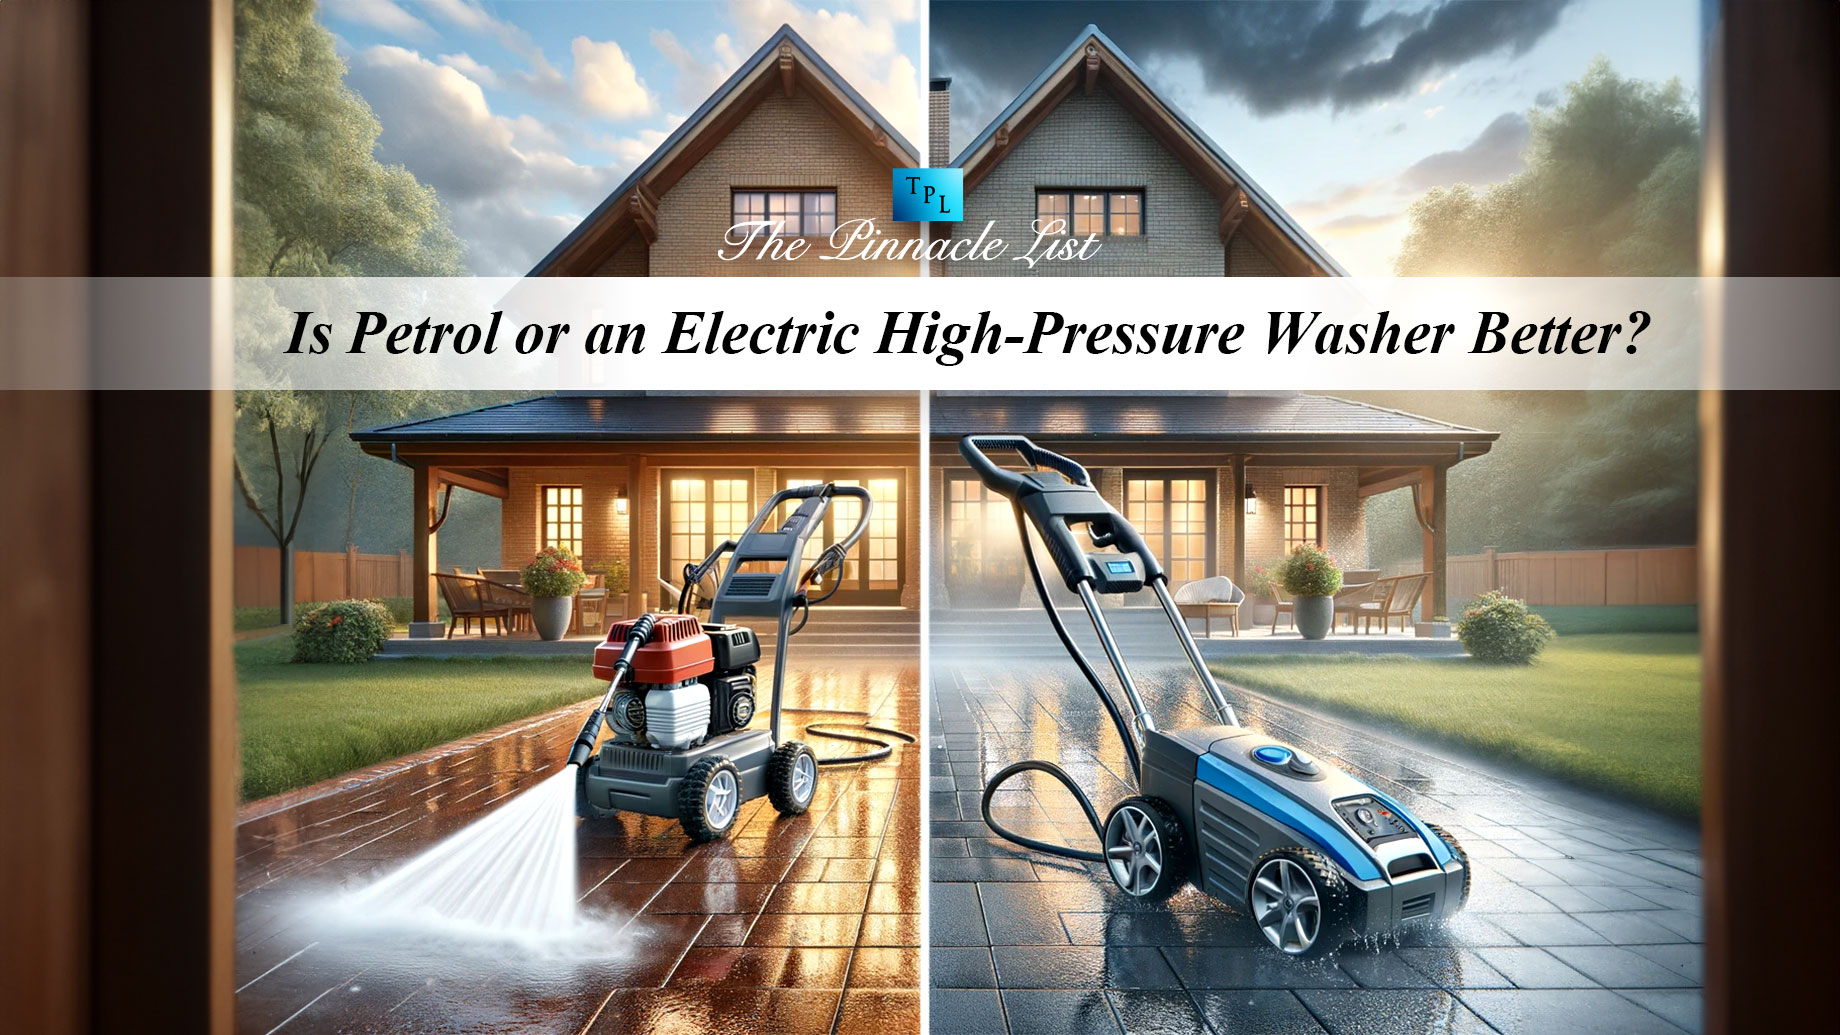 Is Petrol or an Electric High-Pressure Washer Better?